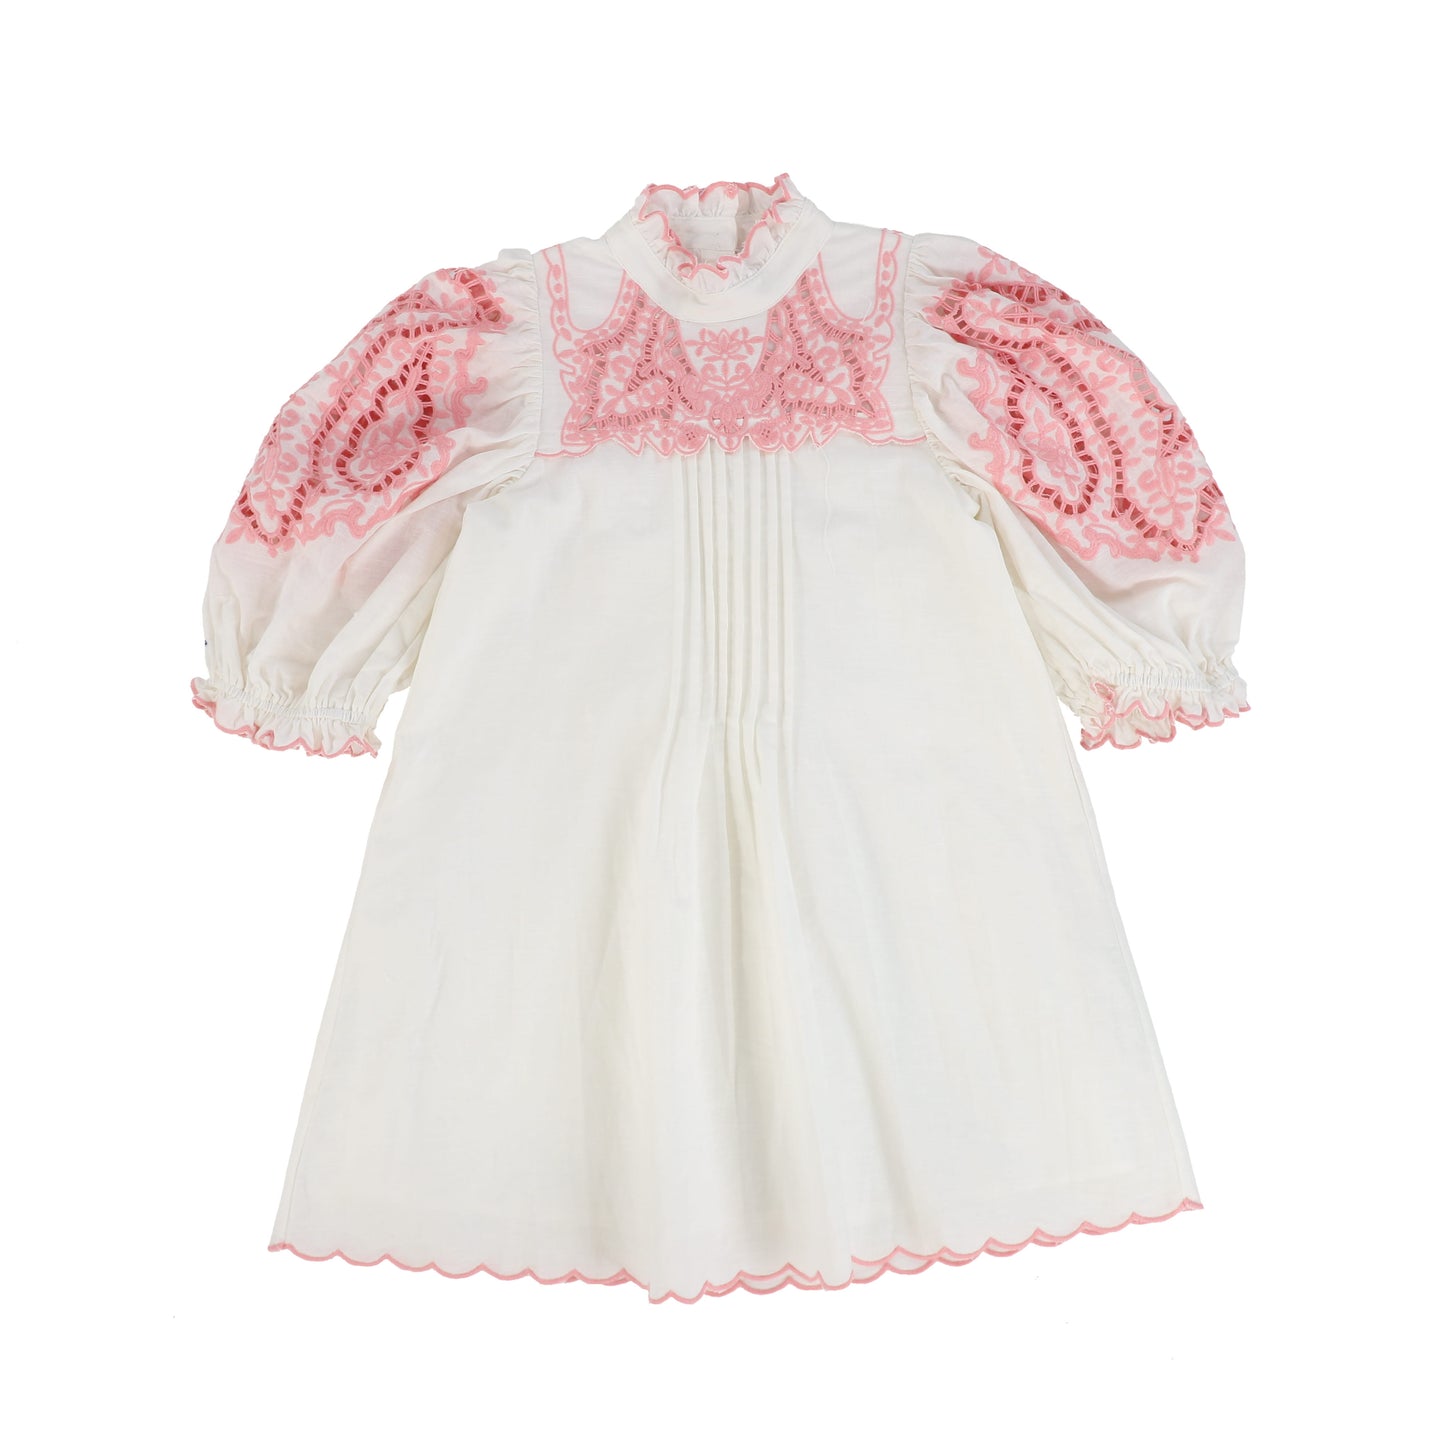 PETITE AMALIE WHITE/PINK EMBROIDERED LINEN SMOCKED DRESS